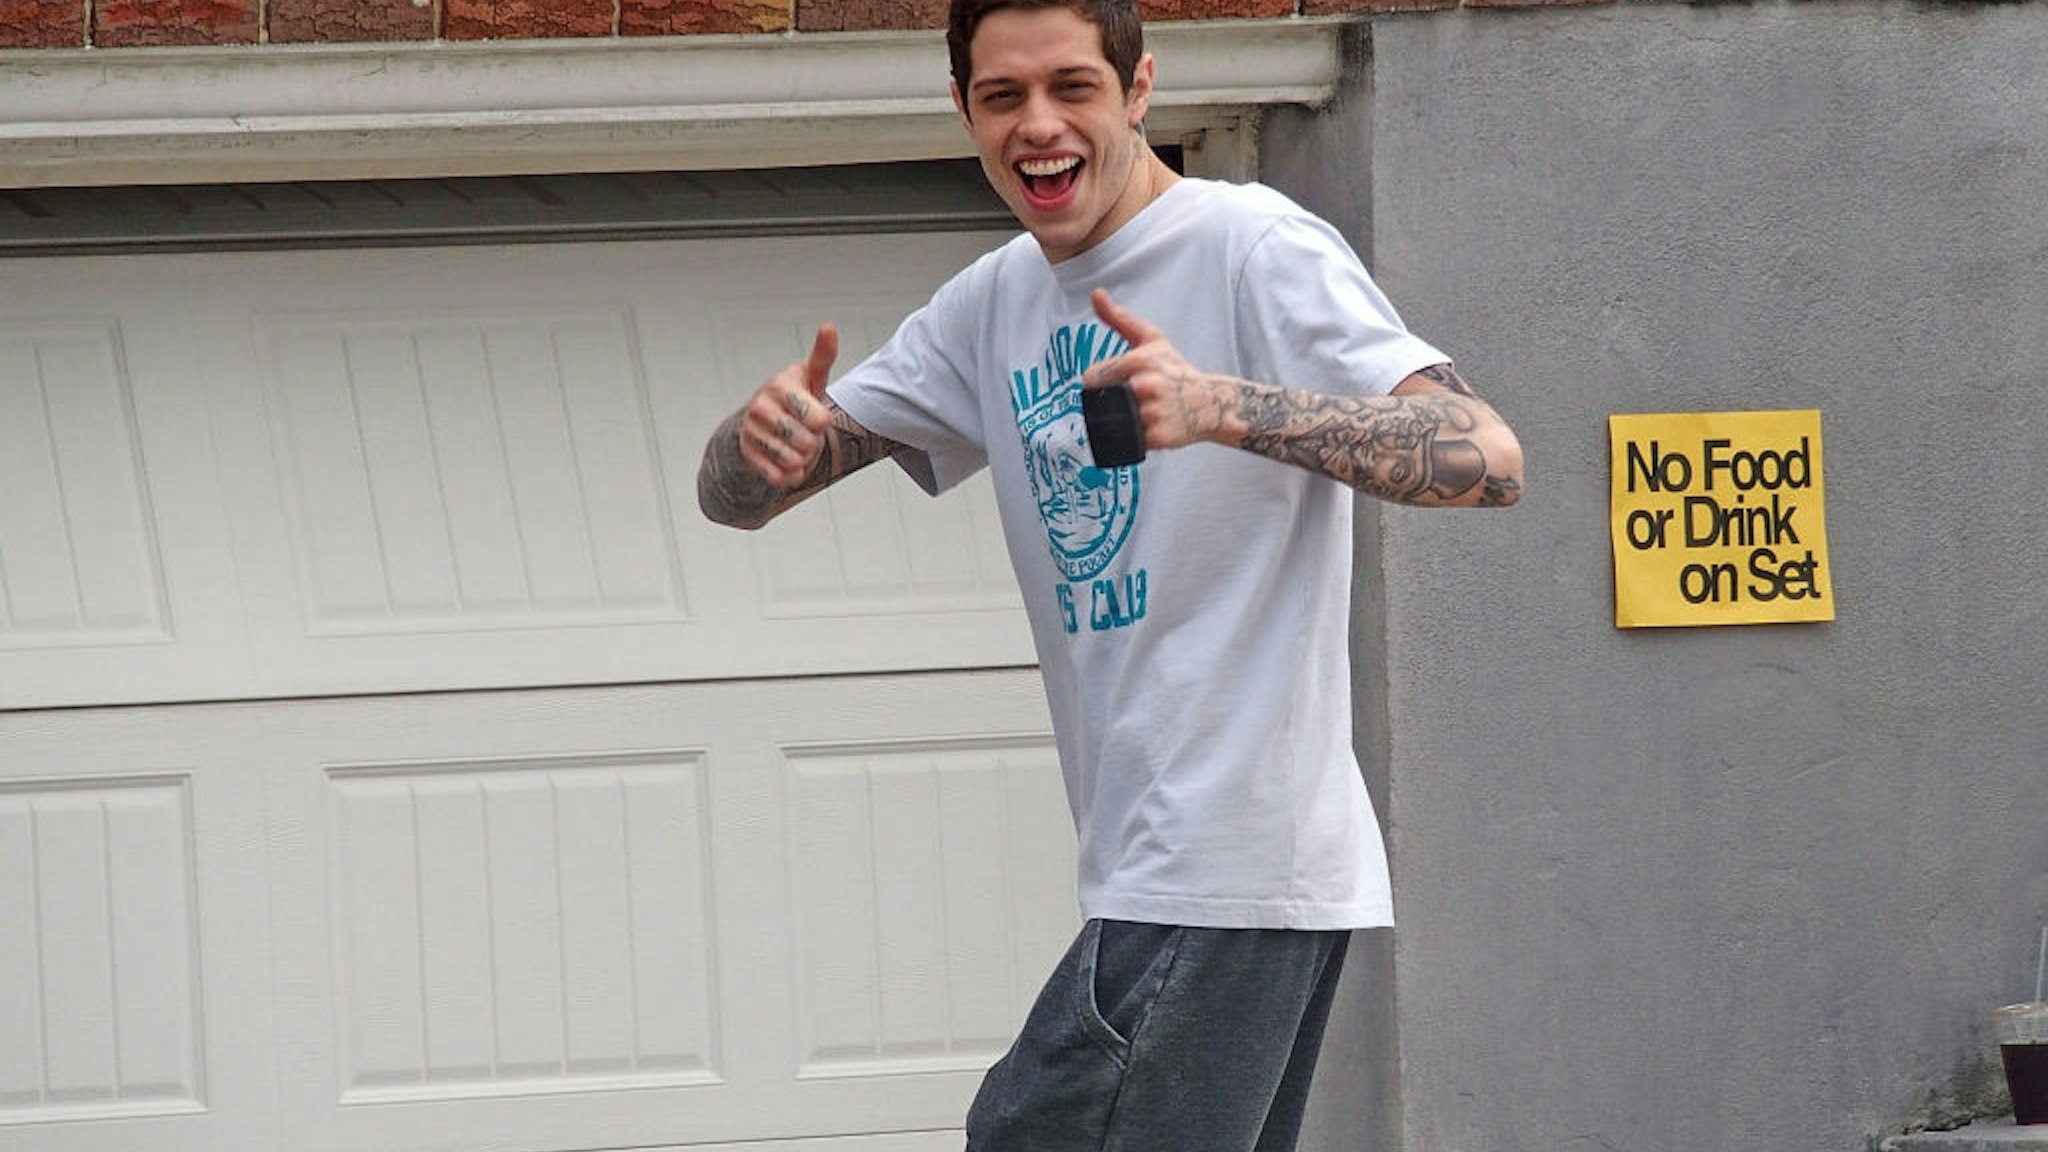 Pete Davidson seen on the set for the untitled Judd Apatow/Pete Davidson project aka "Staten Island" on June 5, 2019 in New York City.